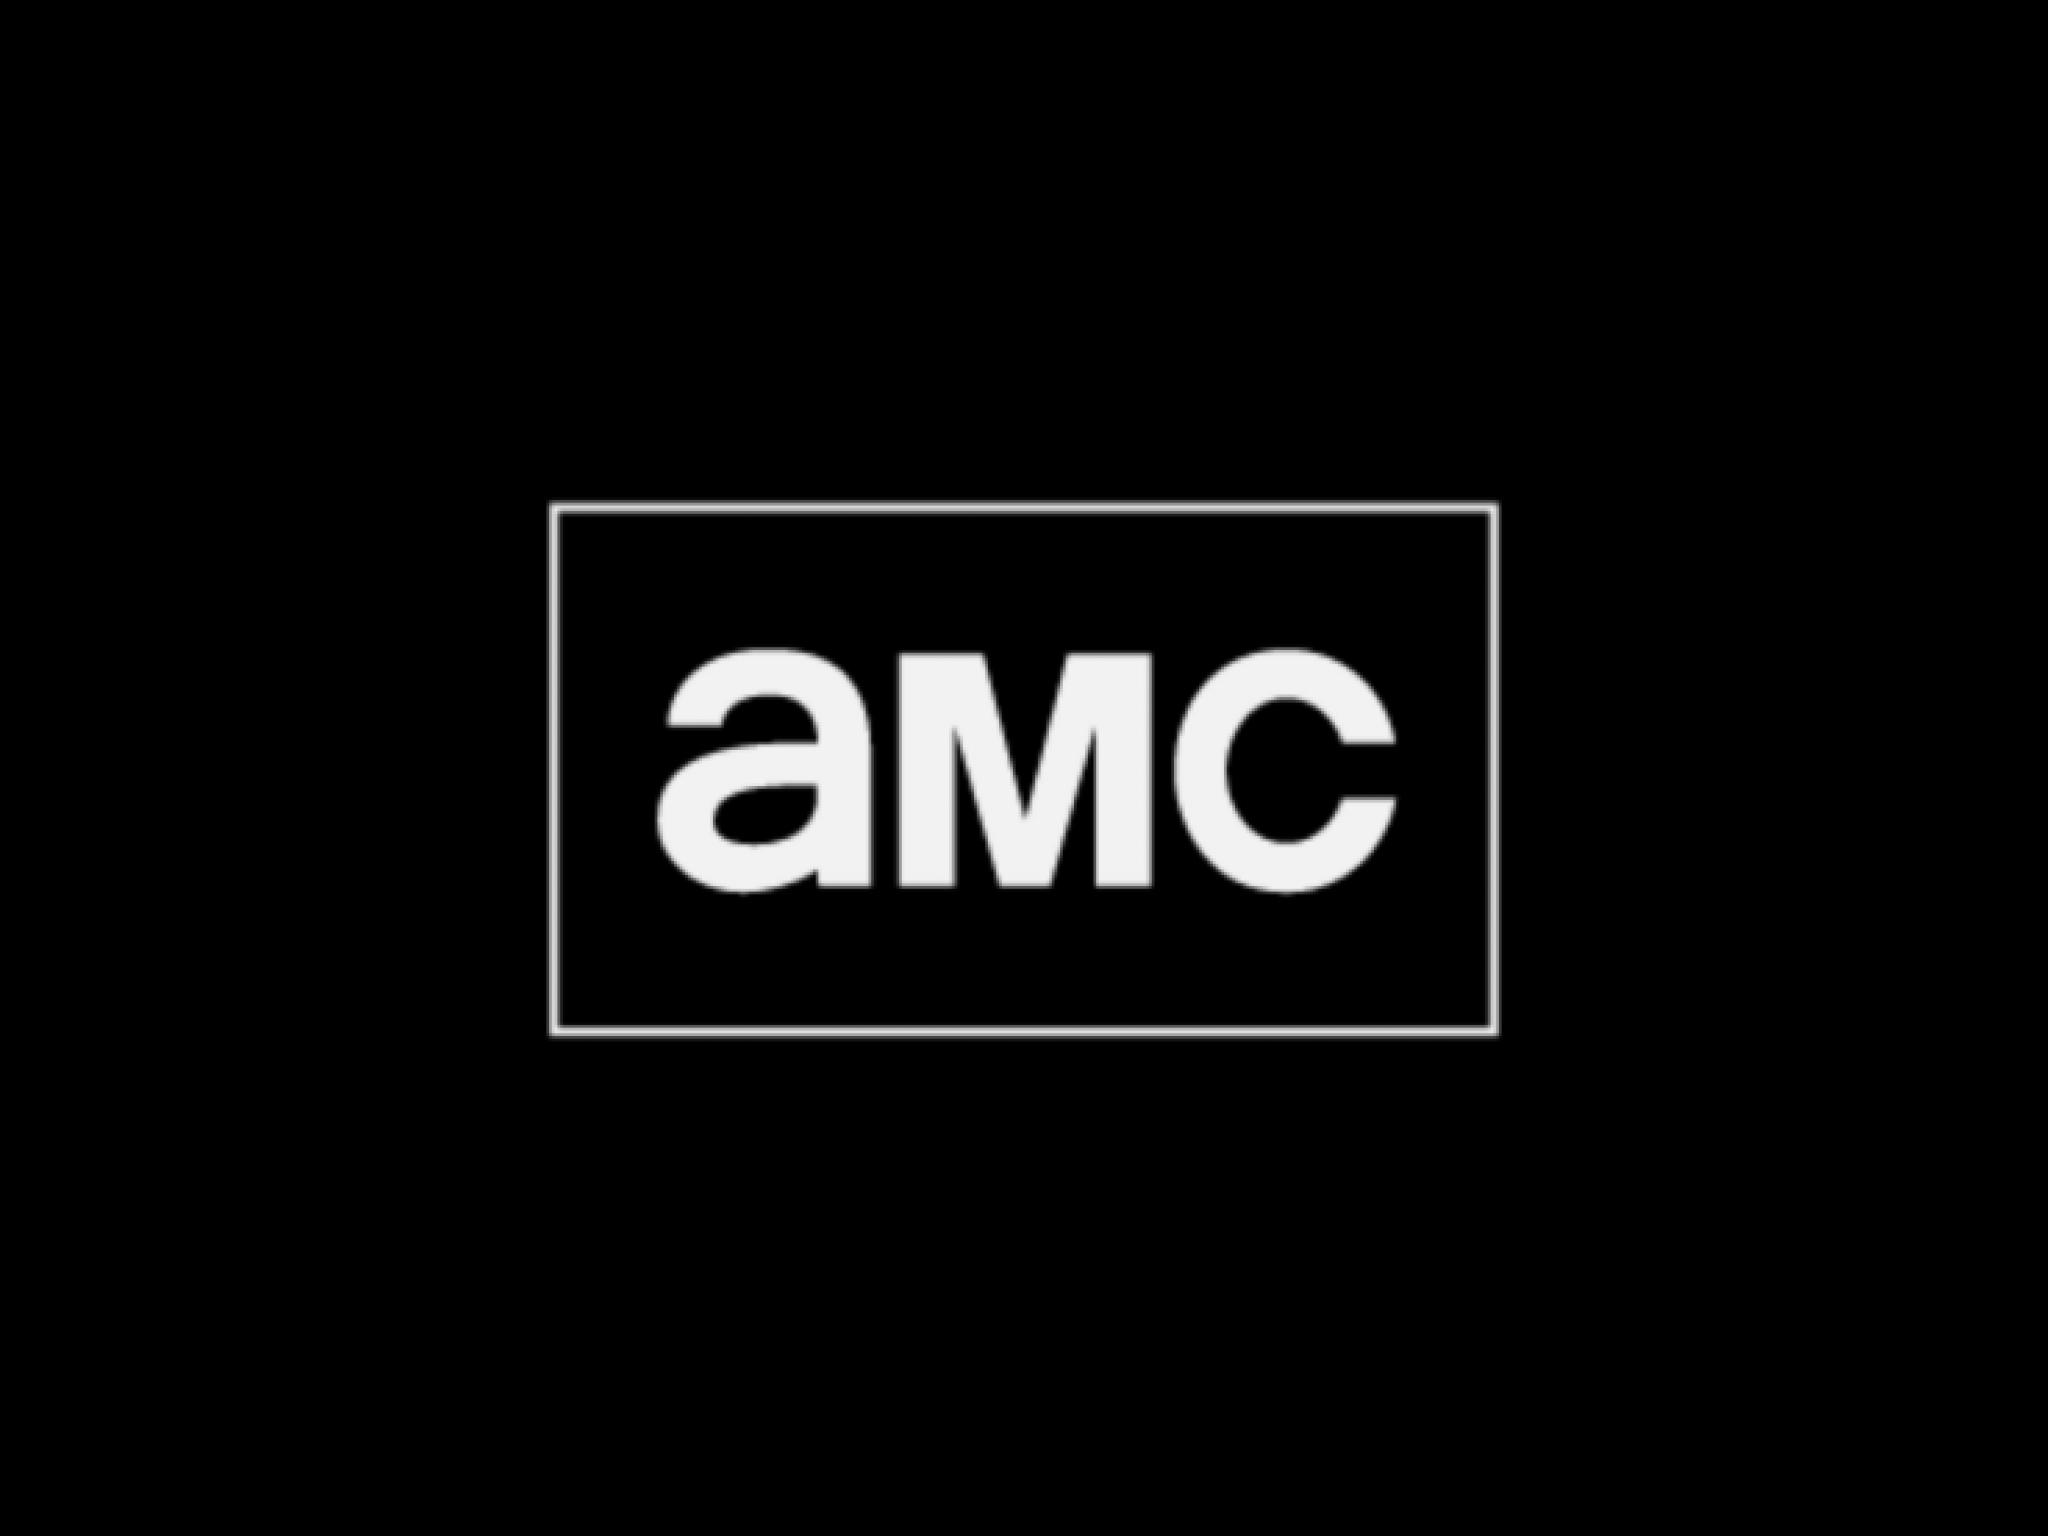  amc-networks-stock-slips-whats-behind-the-sharp-revenue-and-eps-decline 